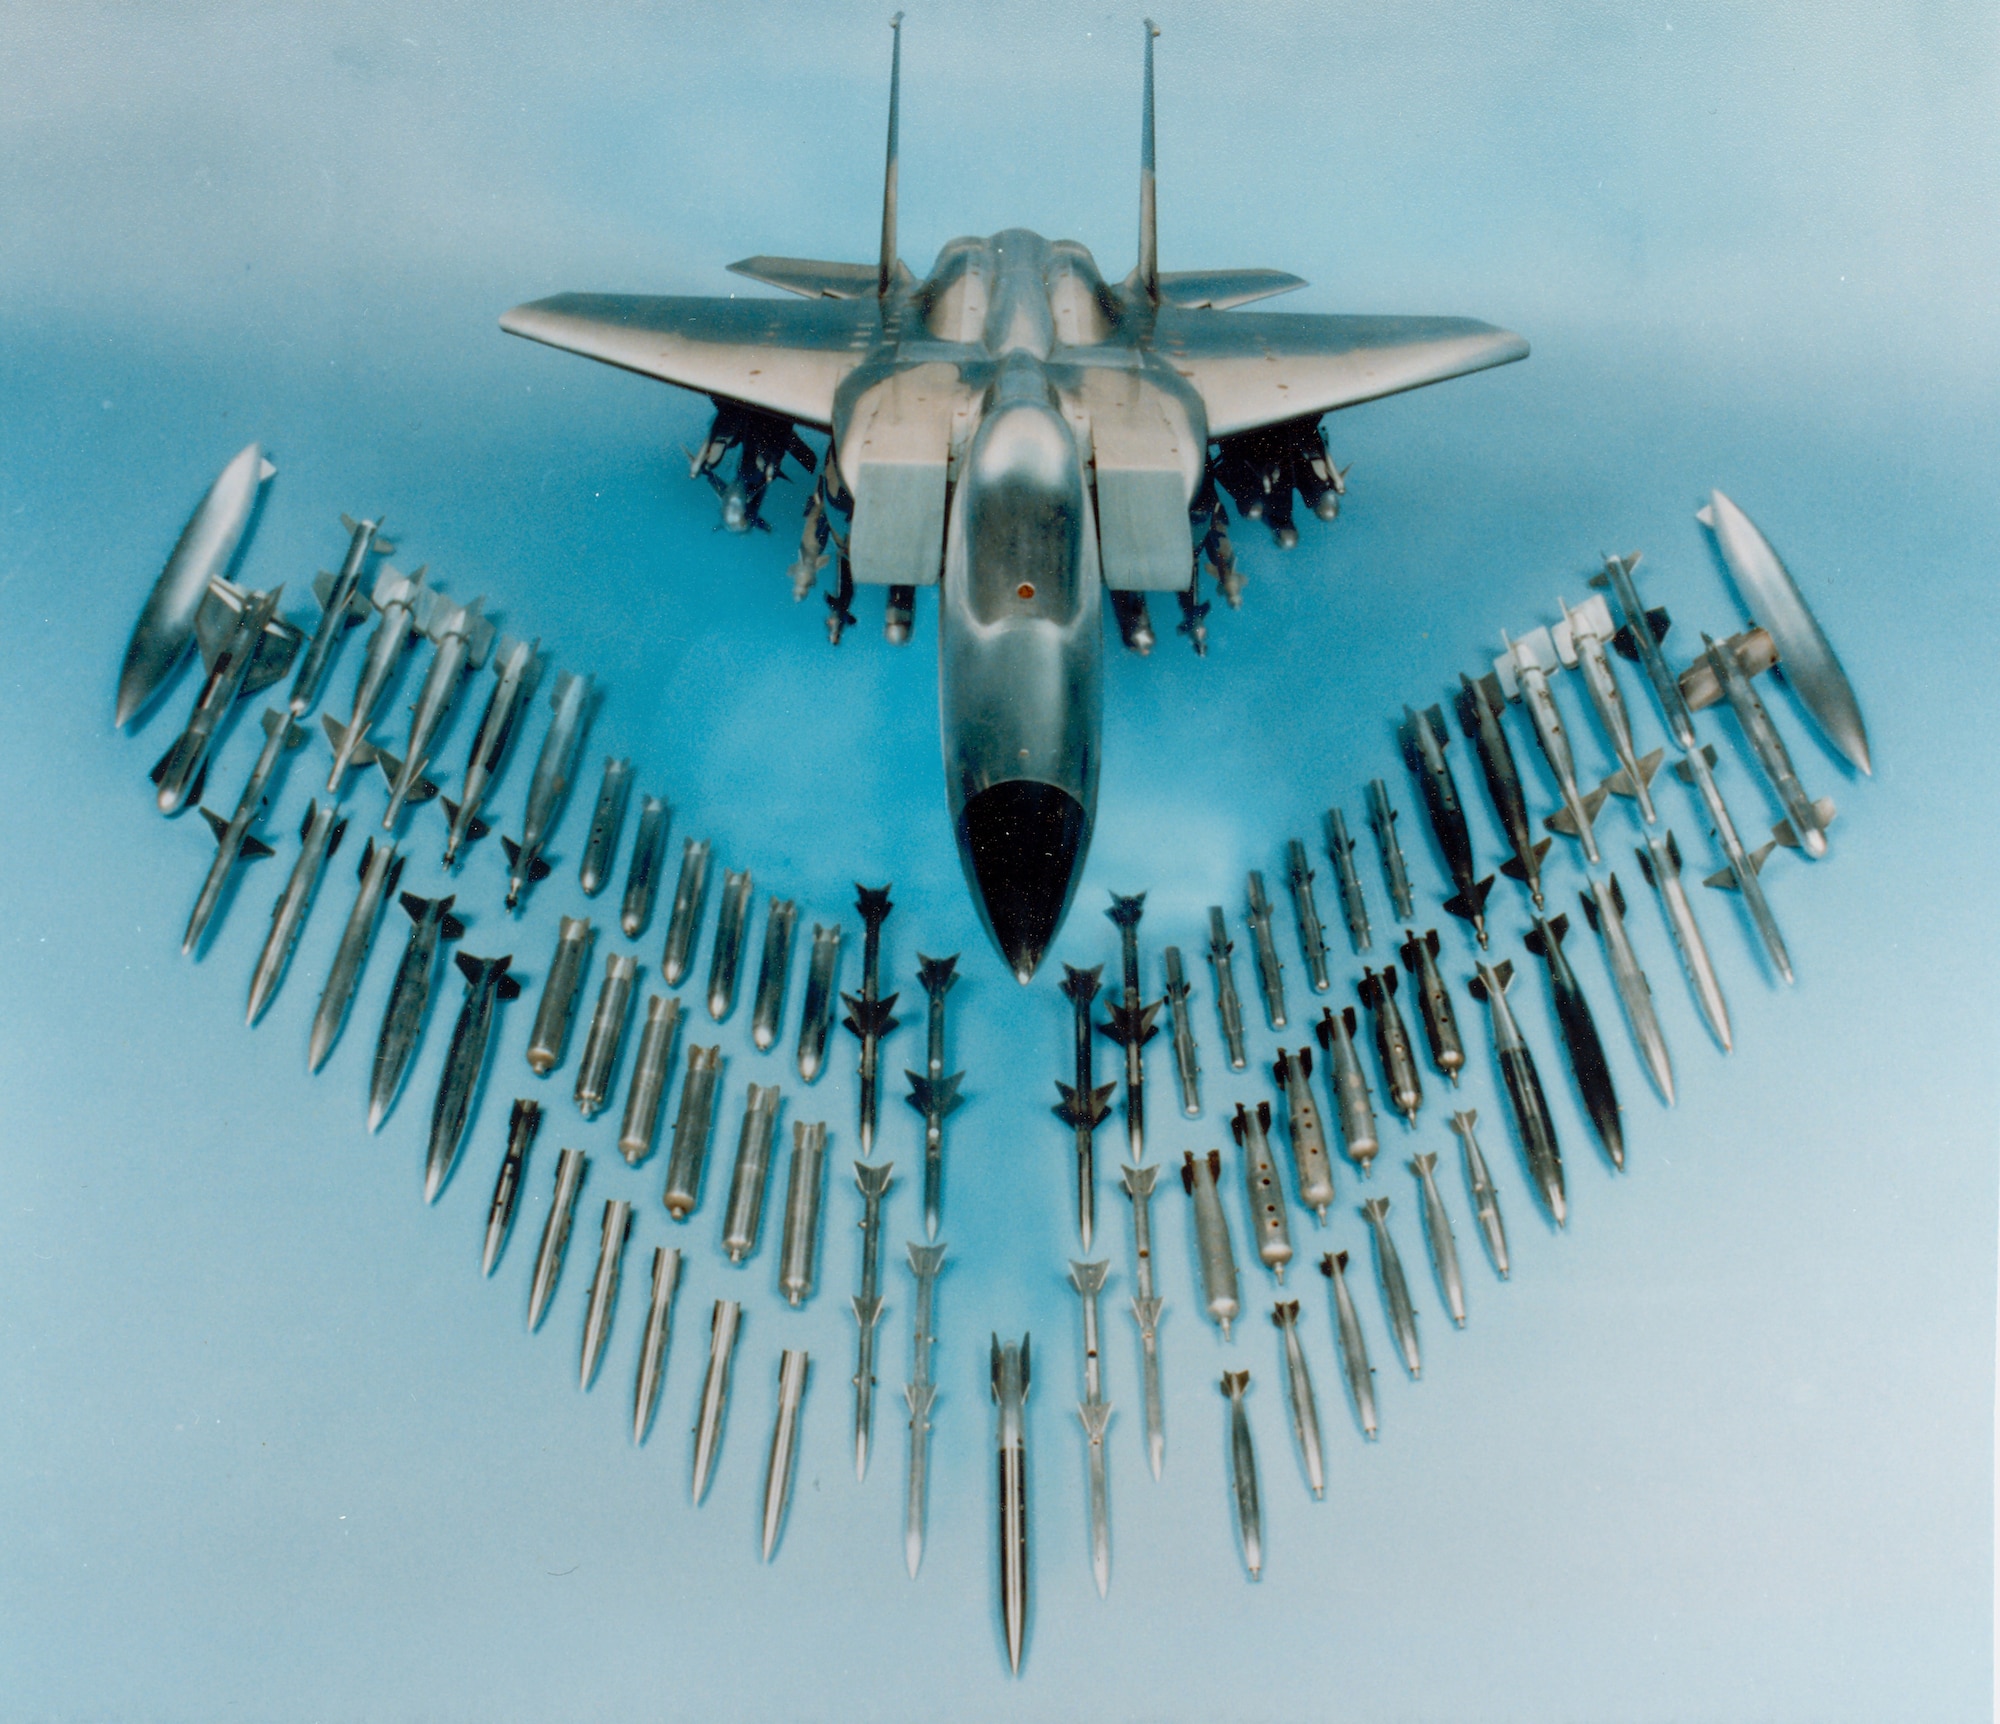 Some of the dozens of different store models used during wind tunnel testing of the F-15E Strike Eagle dual-role fighter aircraft by Arnold Engineering Development Complex, headquartered at Arnold Air Force Base, Tennessee, are shown in this photo from the early 1990s. More than 500 aircraft and store configurations have been investigated throughout the years to ensure that the F-15E can safely deliver the wide array of weapons needed to accomplish its air-to ground and air-to-air missions. The Air Force recently celebrated the 50th anniversary of the F-15’s deployment. Models of the aircraft, engines and other F-15 components, including those of the F-15E, have frequently been tested in AEDC facilities over the past 50 years. (U.S. Air Force photo)